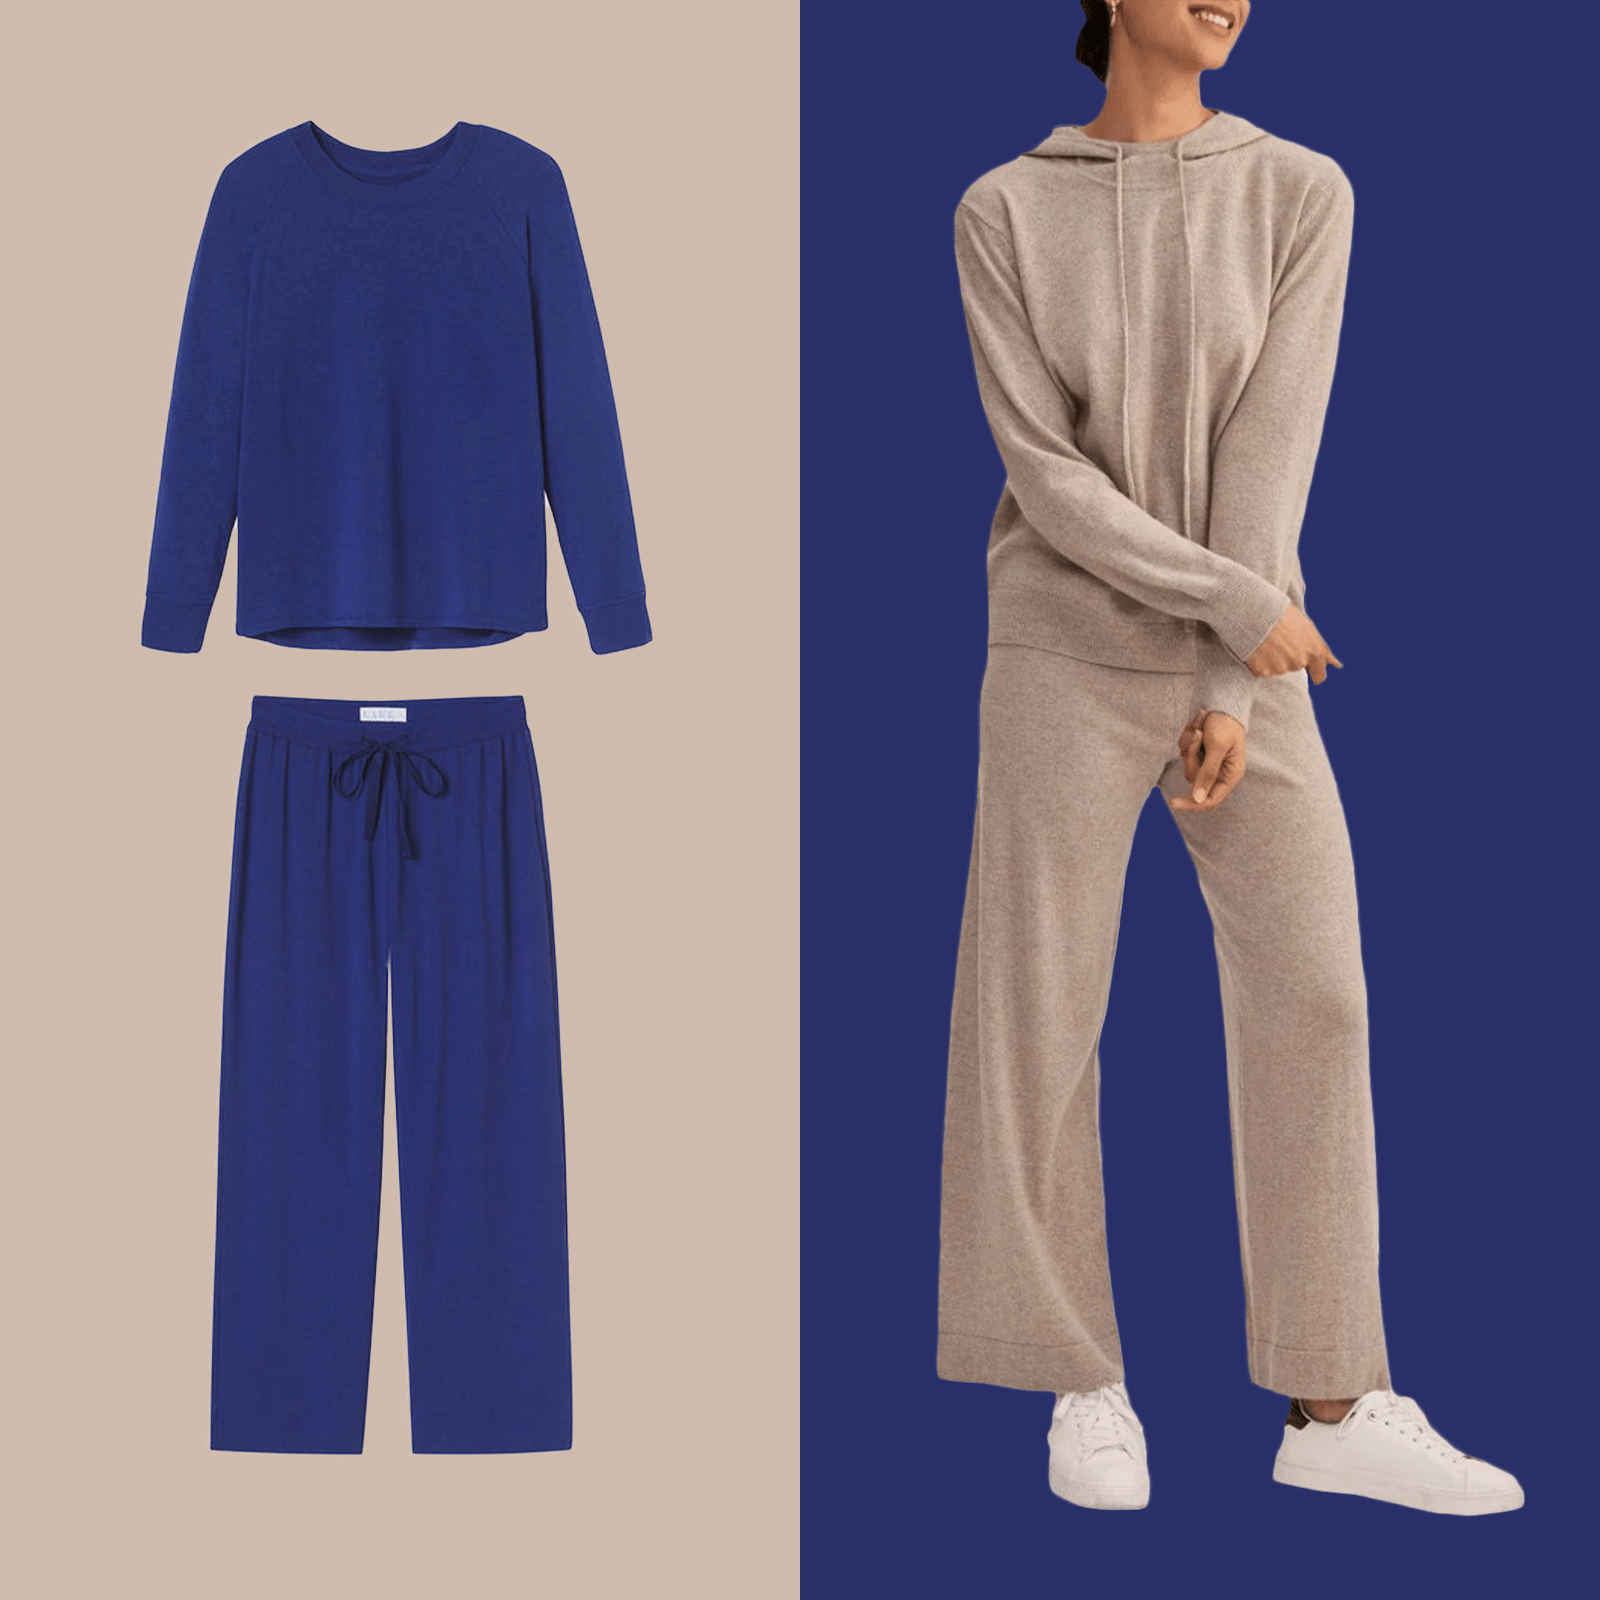 20 Best Loungewear Sets You’ll Want to Wear All Day